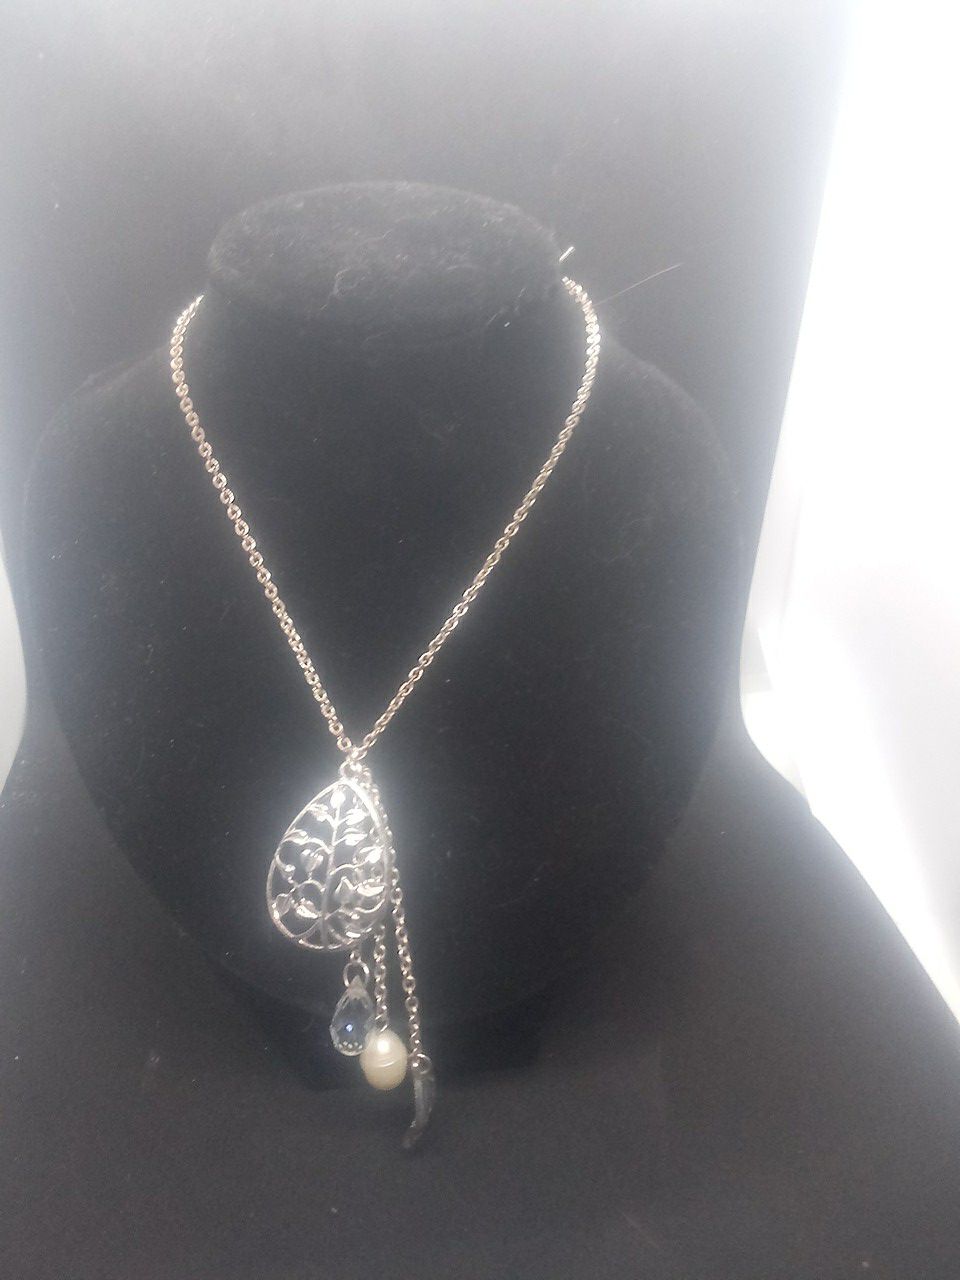 Beautiful casual necklacee/ ivy pendant